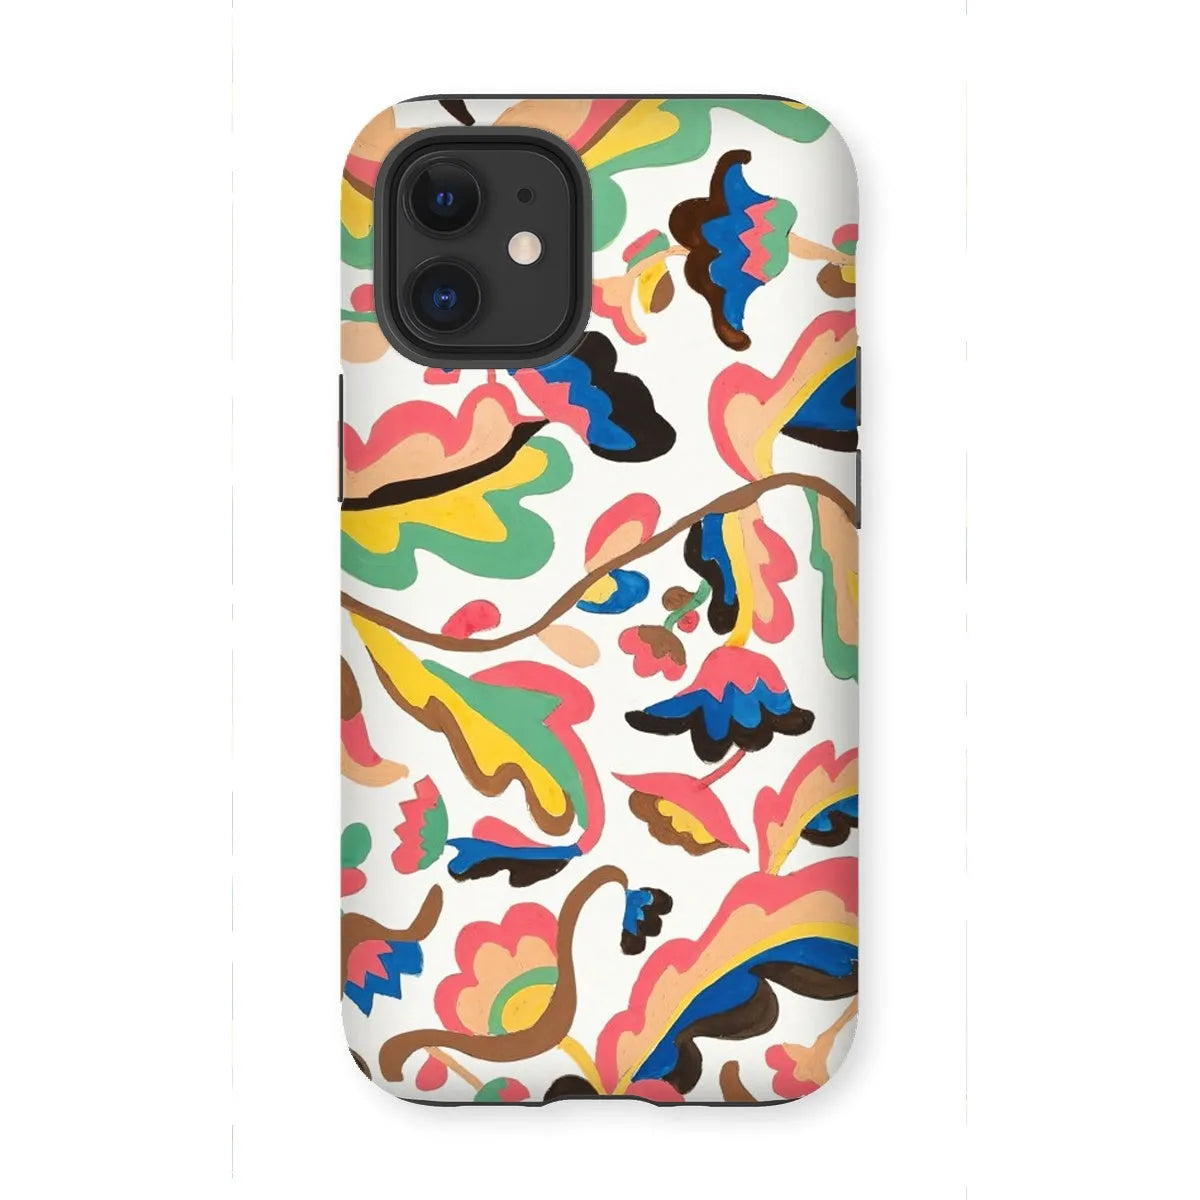 Colcha Floral Aesthetic Pattern Phone Case - Etna Wiswall - Iphone 12 Mini / Matte - Mobile Phone Cases - Aesthetic Art